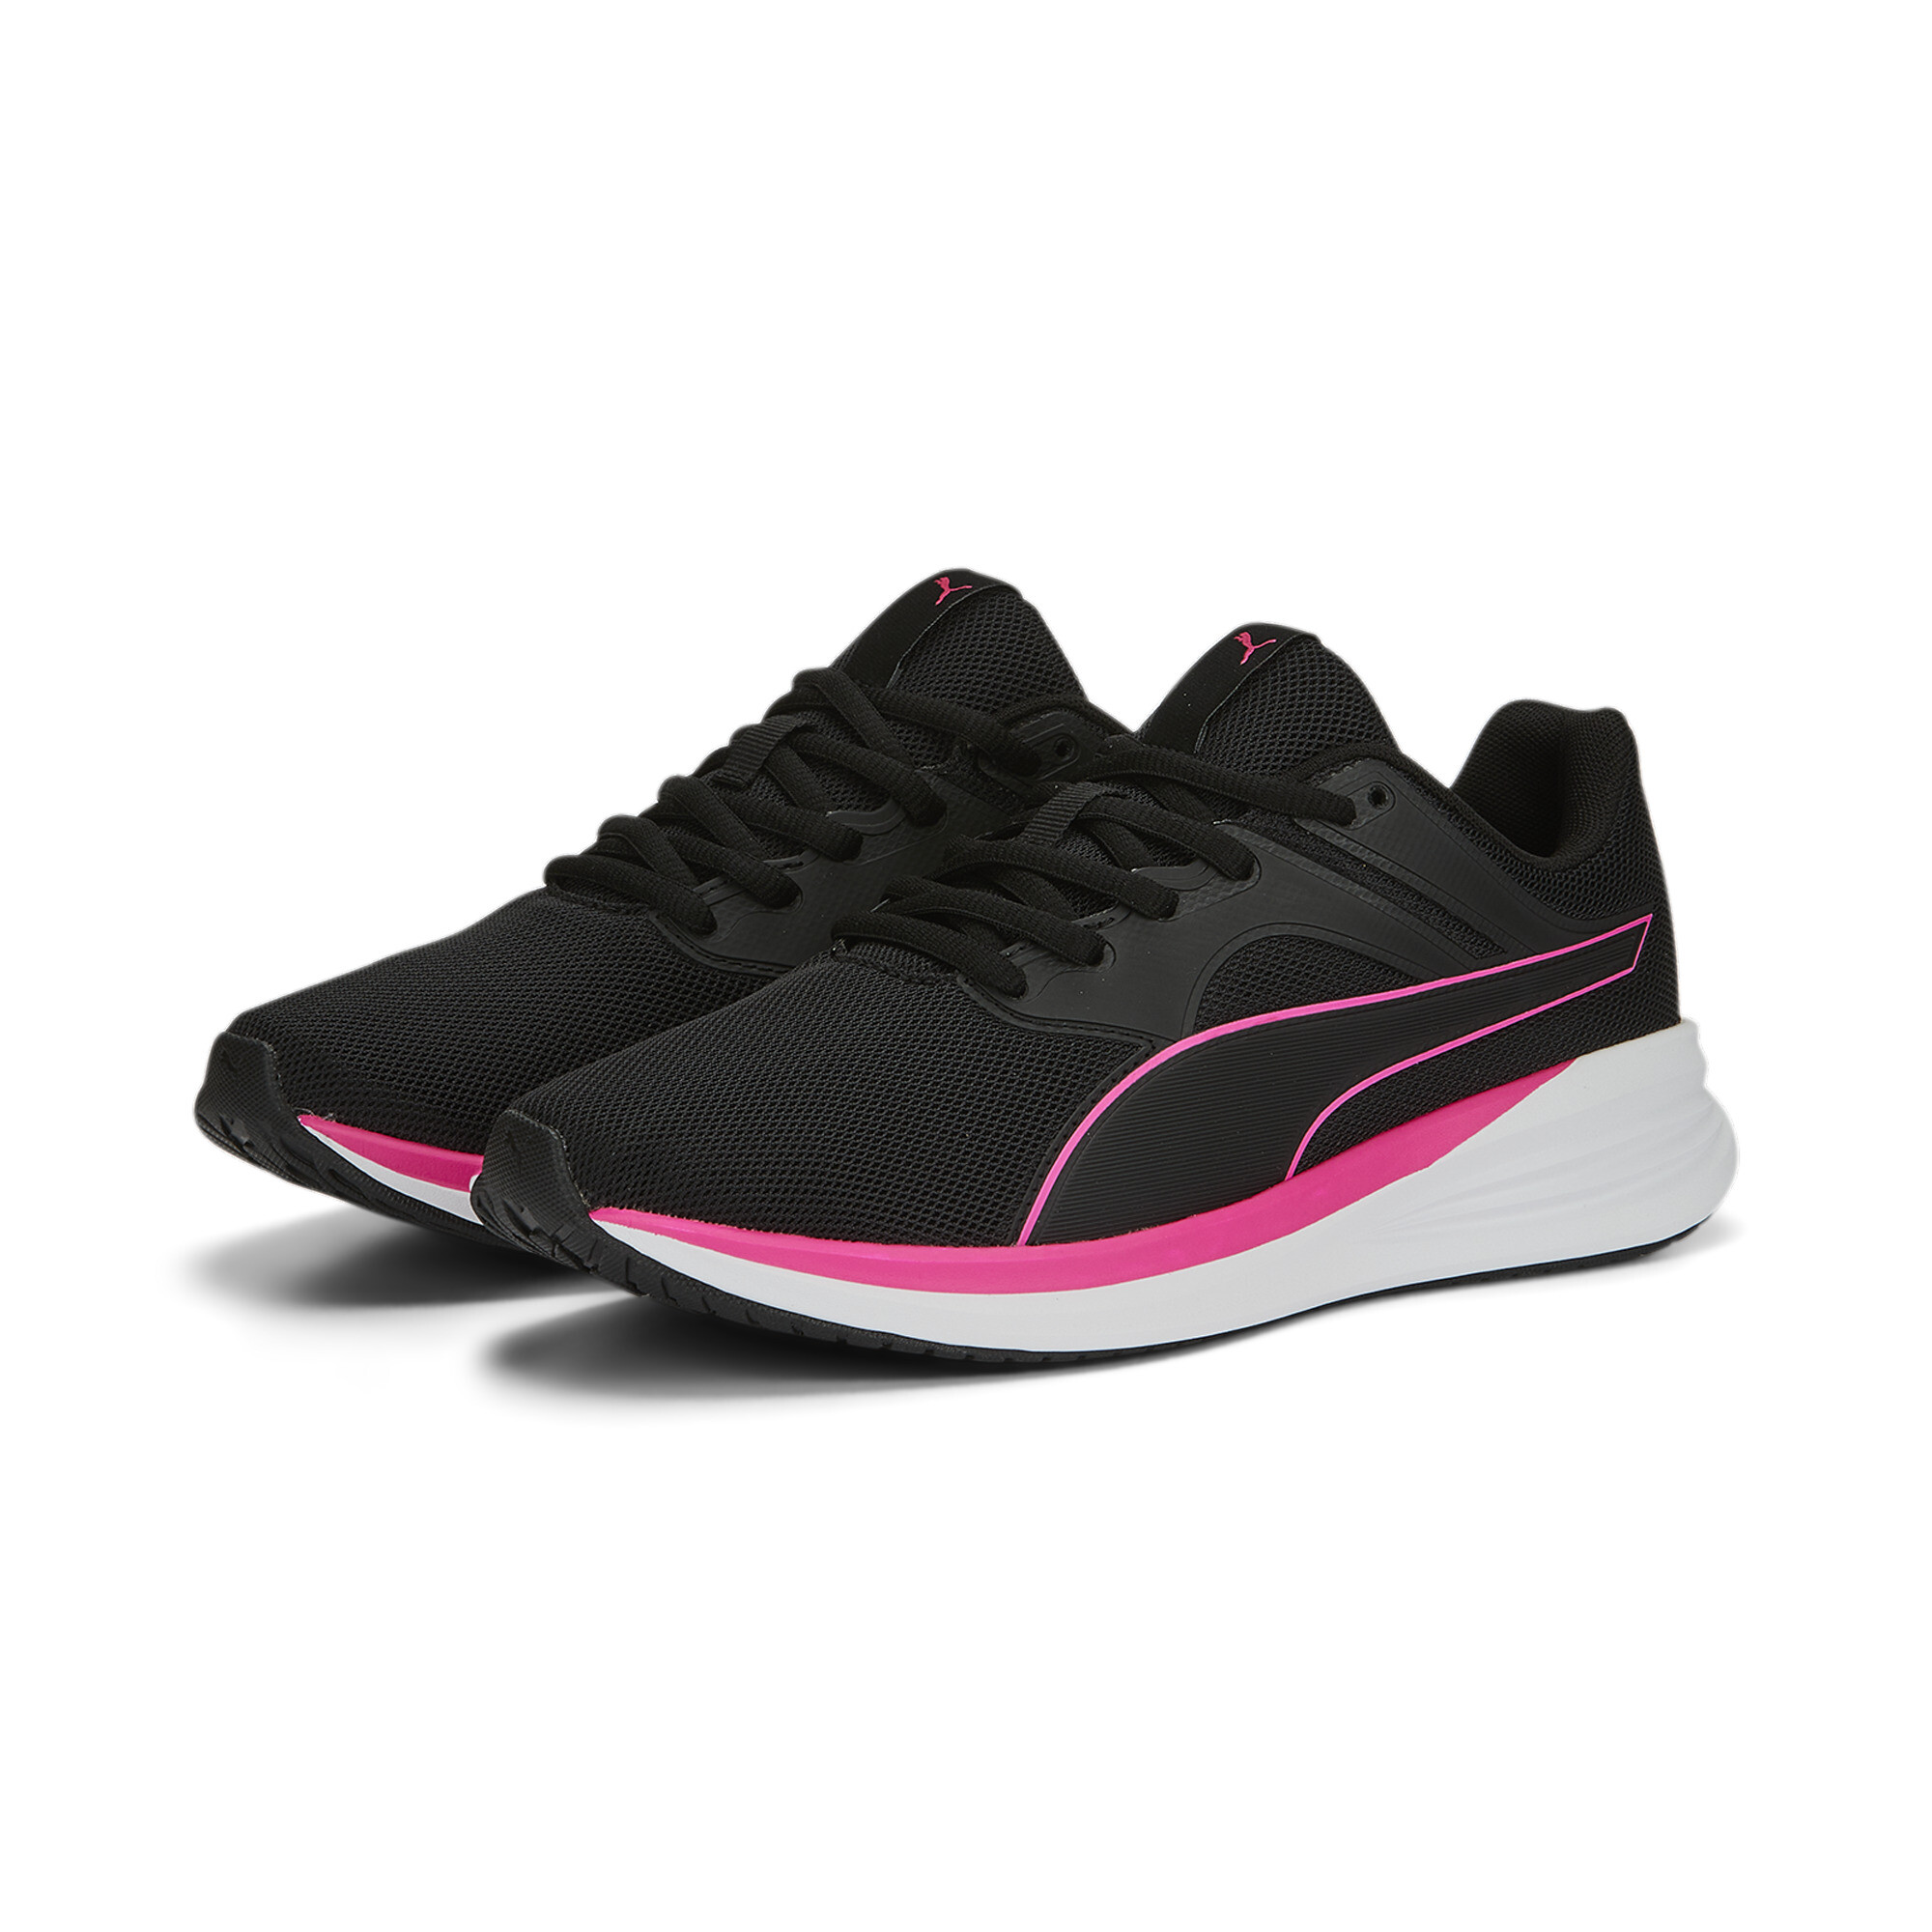 Puma Transport Running Shoes, Black, Size 44, Shoes